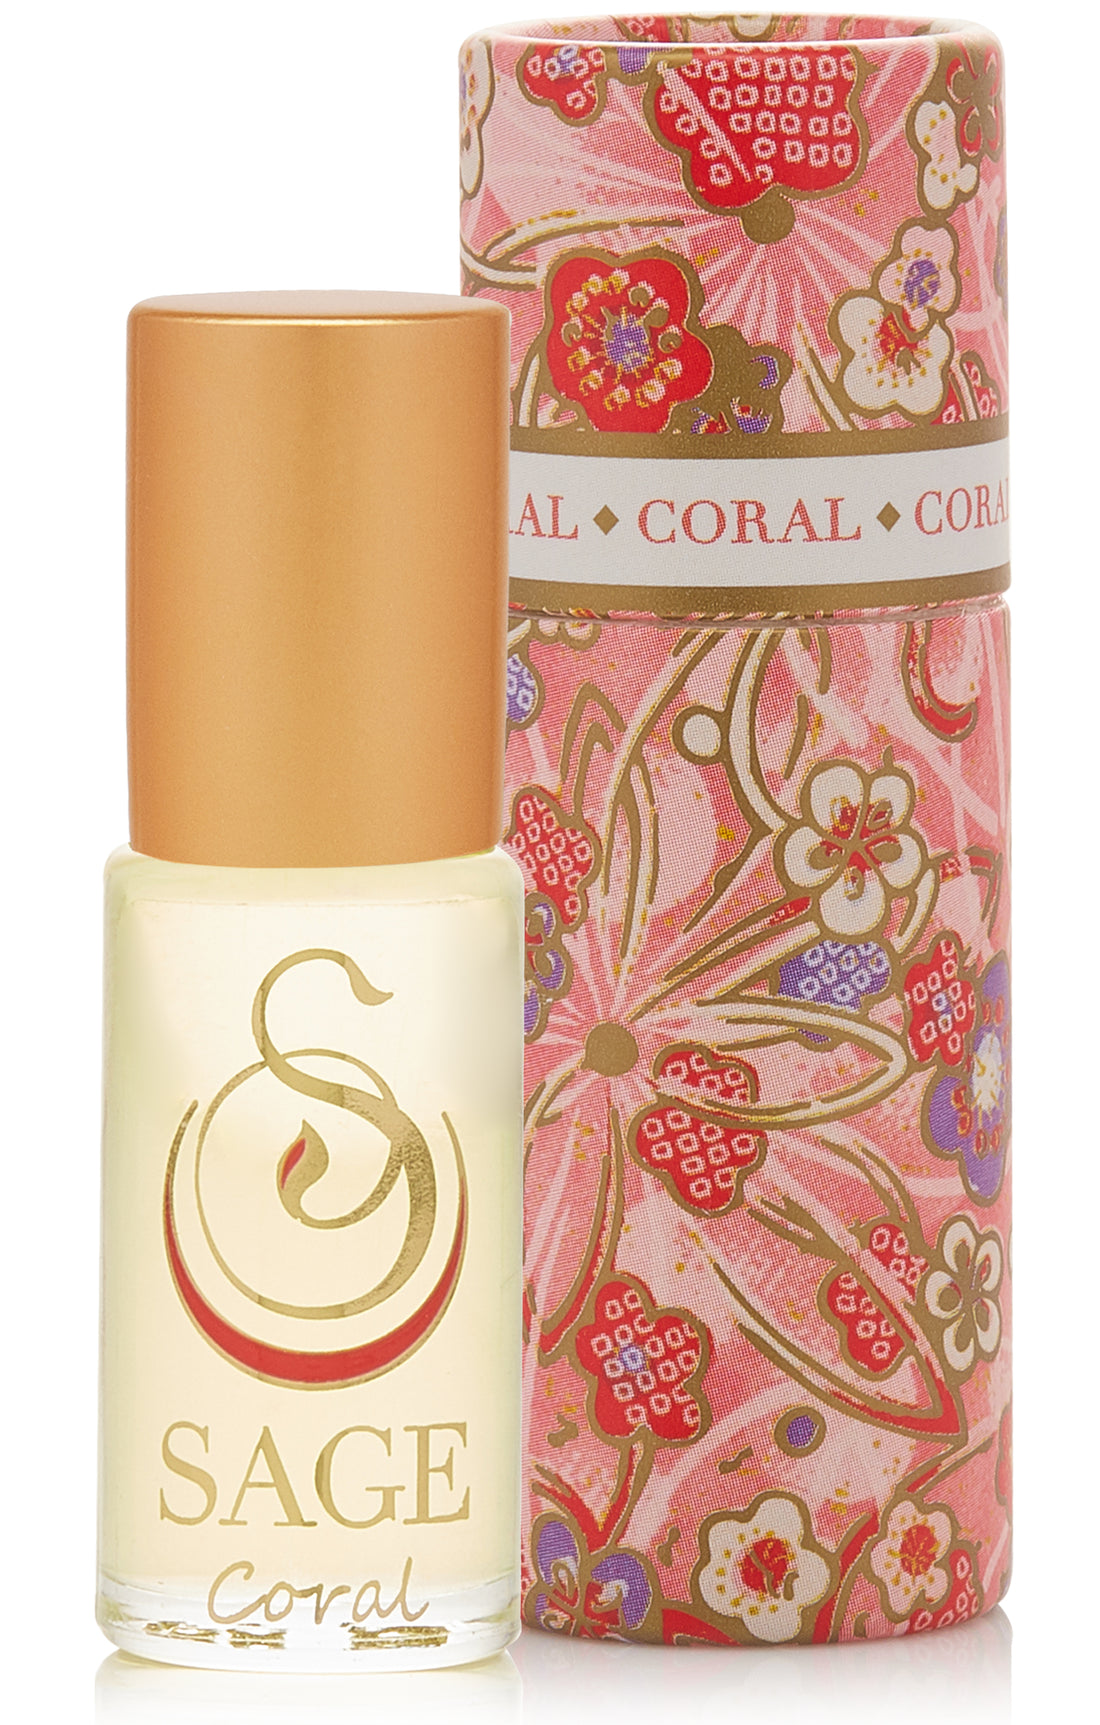 Coral 1/8 oz Perfume Oil Concentrate Roll-On by Sage